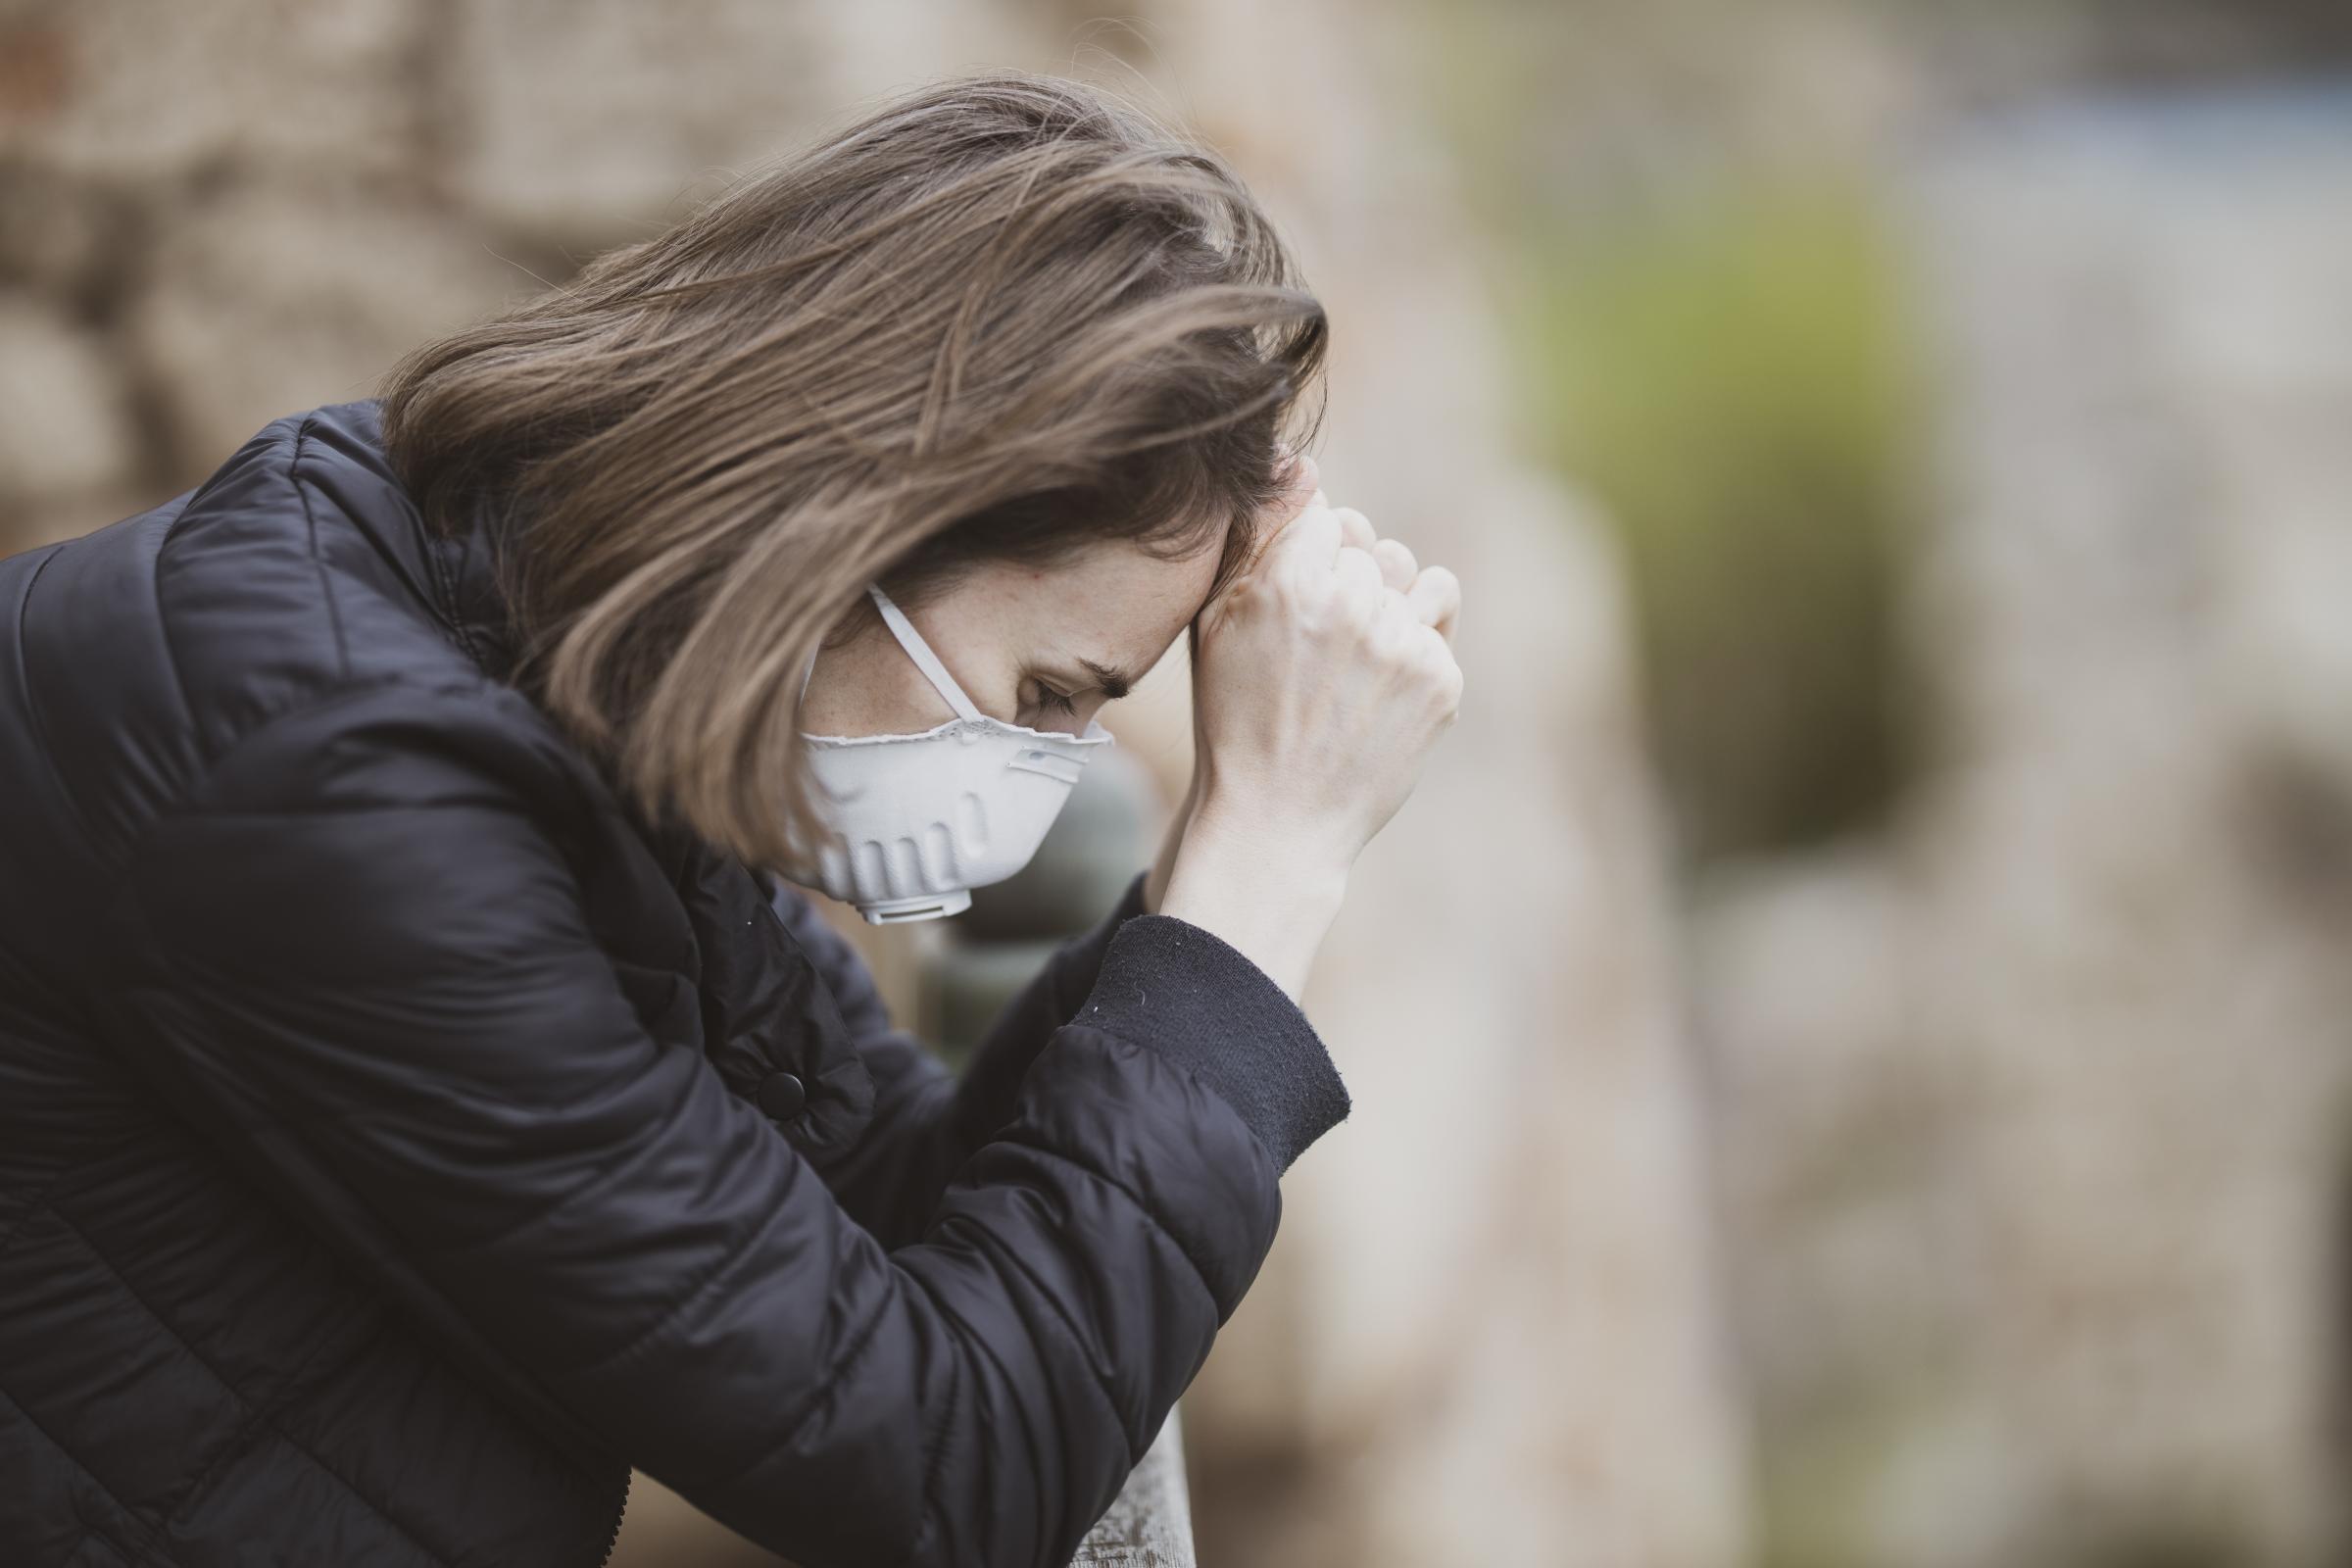 About 140,000 Londoners are suffering long Covid symptoms. Photo: PIxabay